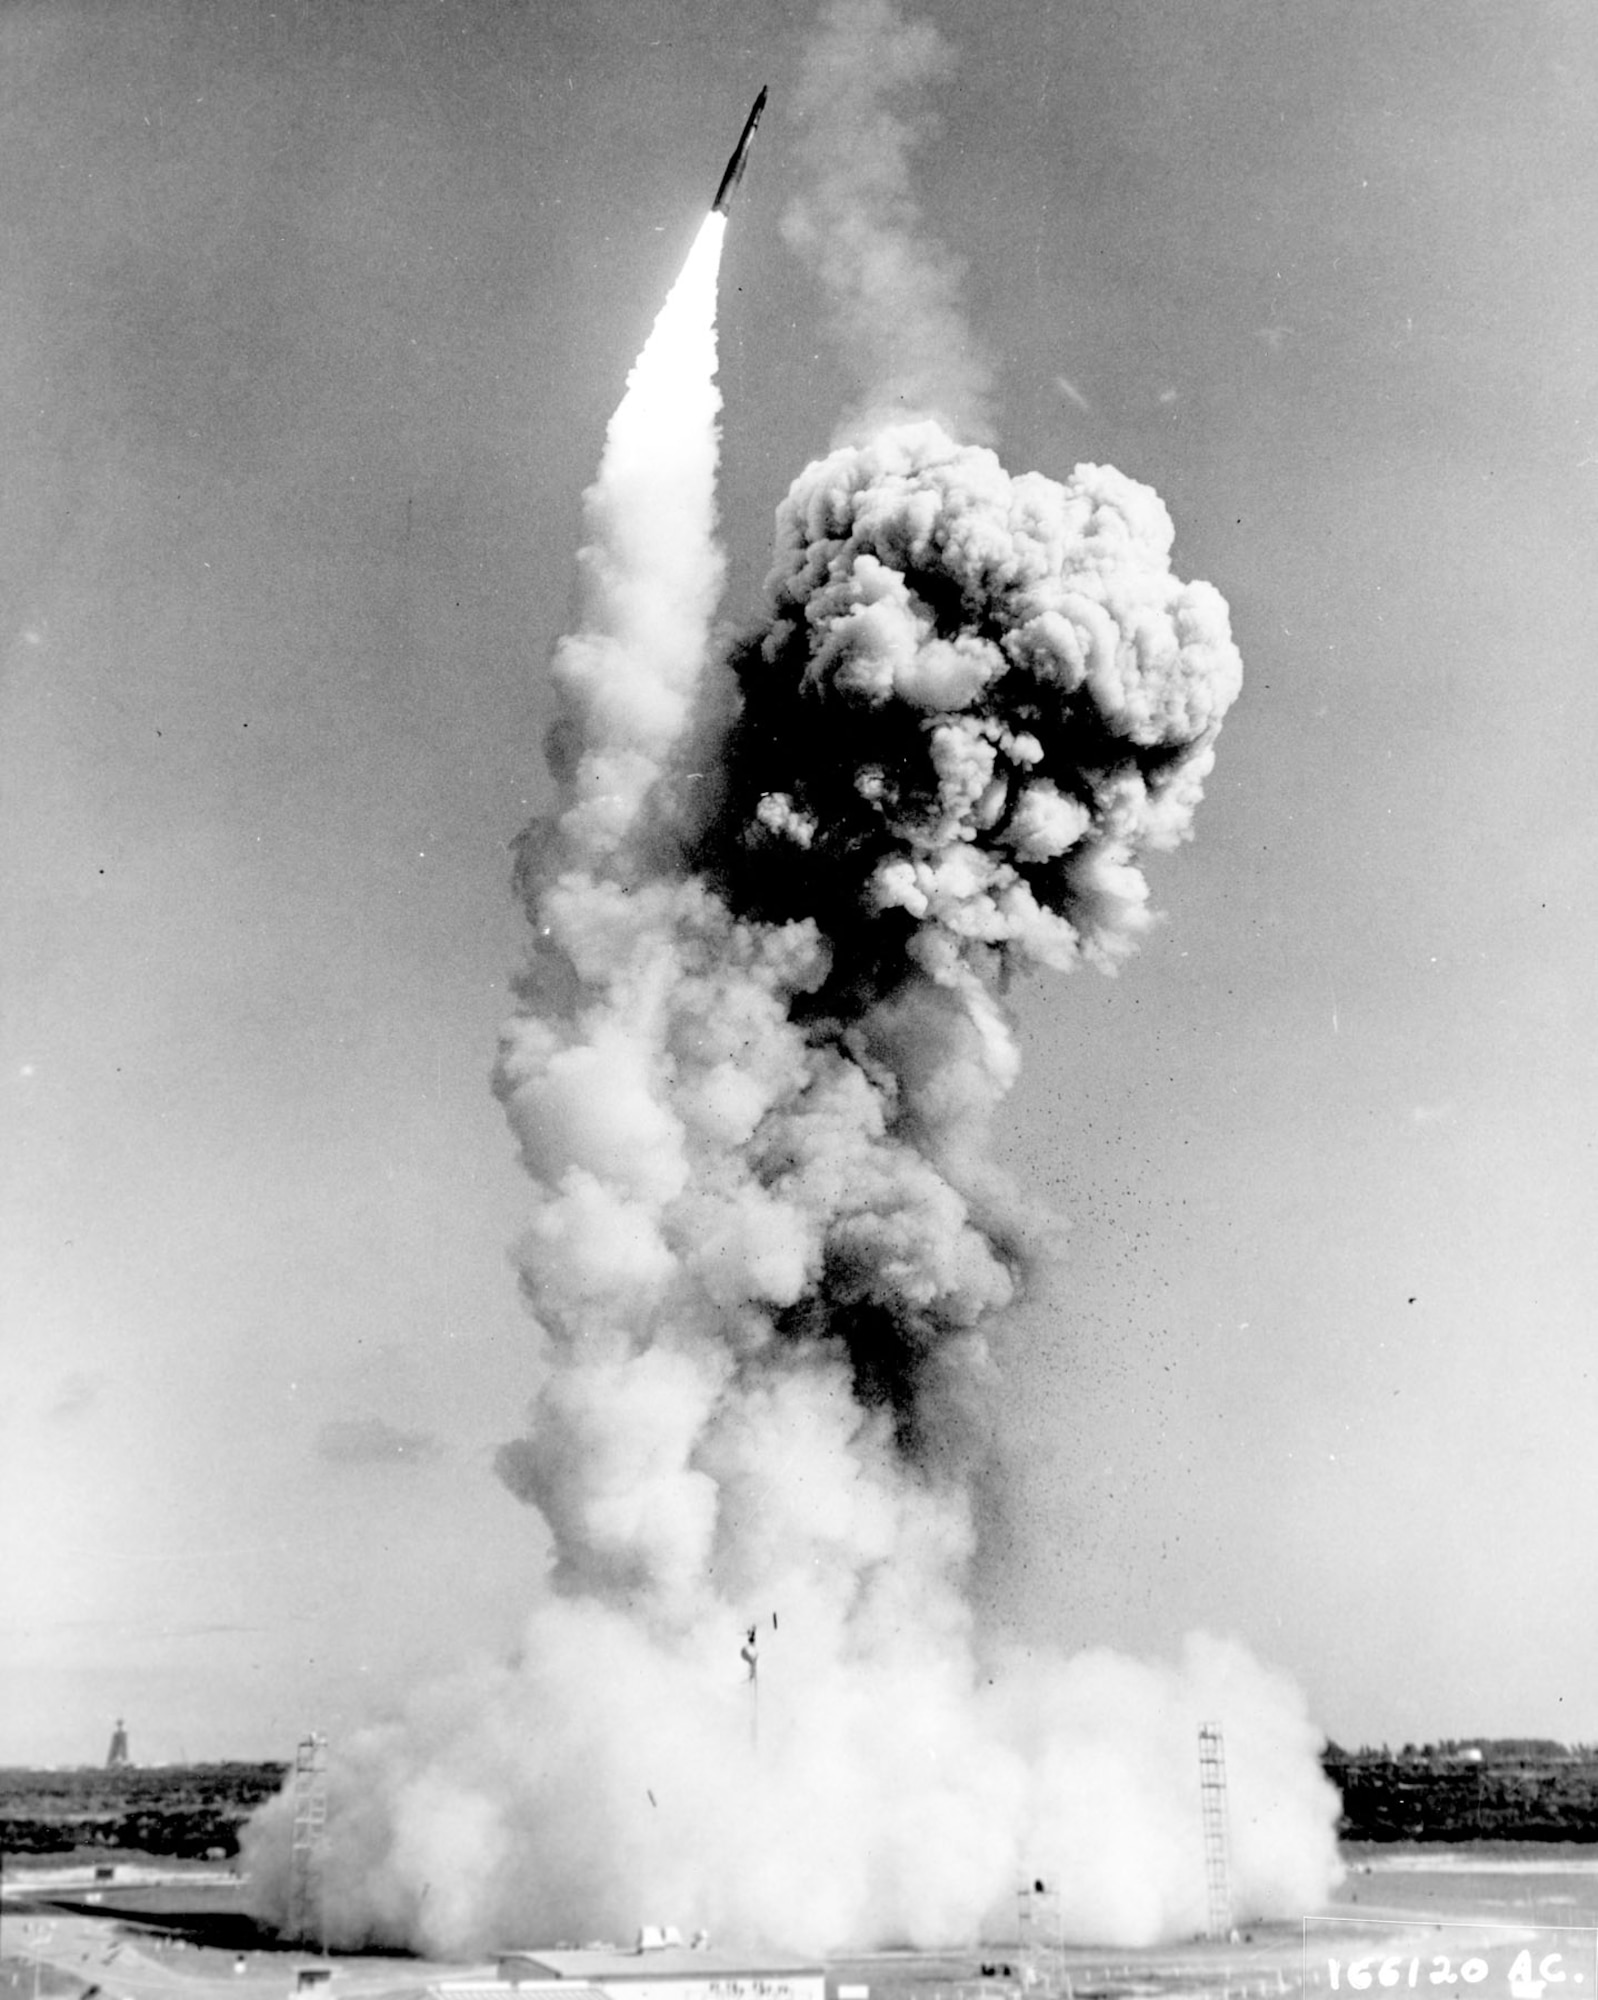 This successful launch took place at Cape Canaveral, Fla., on Nov. 17, 1961. Minuteman became operational less than a year later. (U.S. Air Force photo)